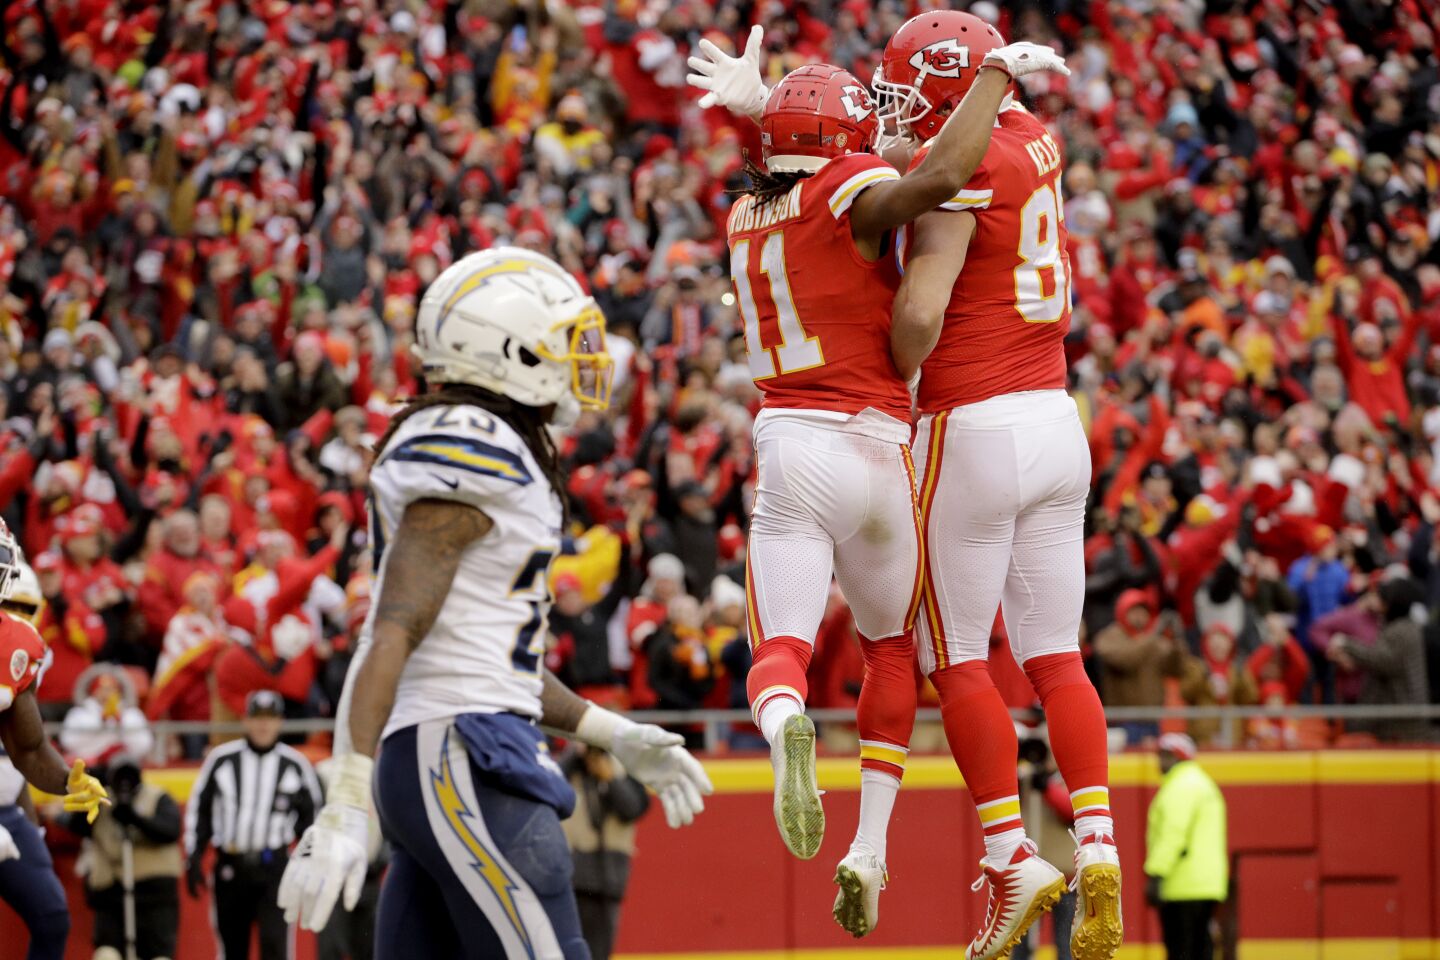 Chiefs receiver Demarcus Robinson (11) celebrates a touchdown with tight end Travis Kelce (87) as Chargers safety Rayshawn Jenkins looks on during a game Sunday.